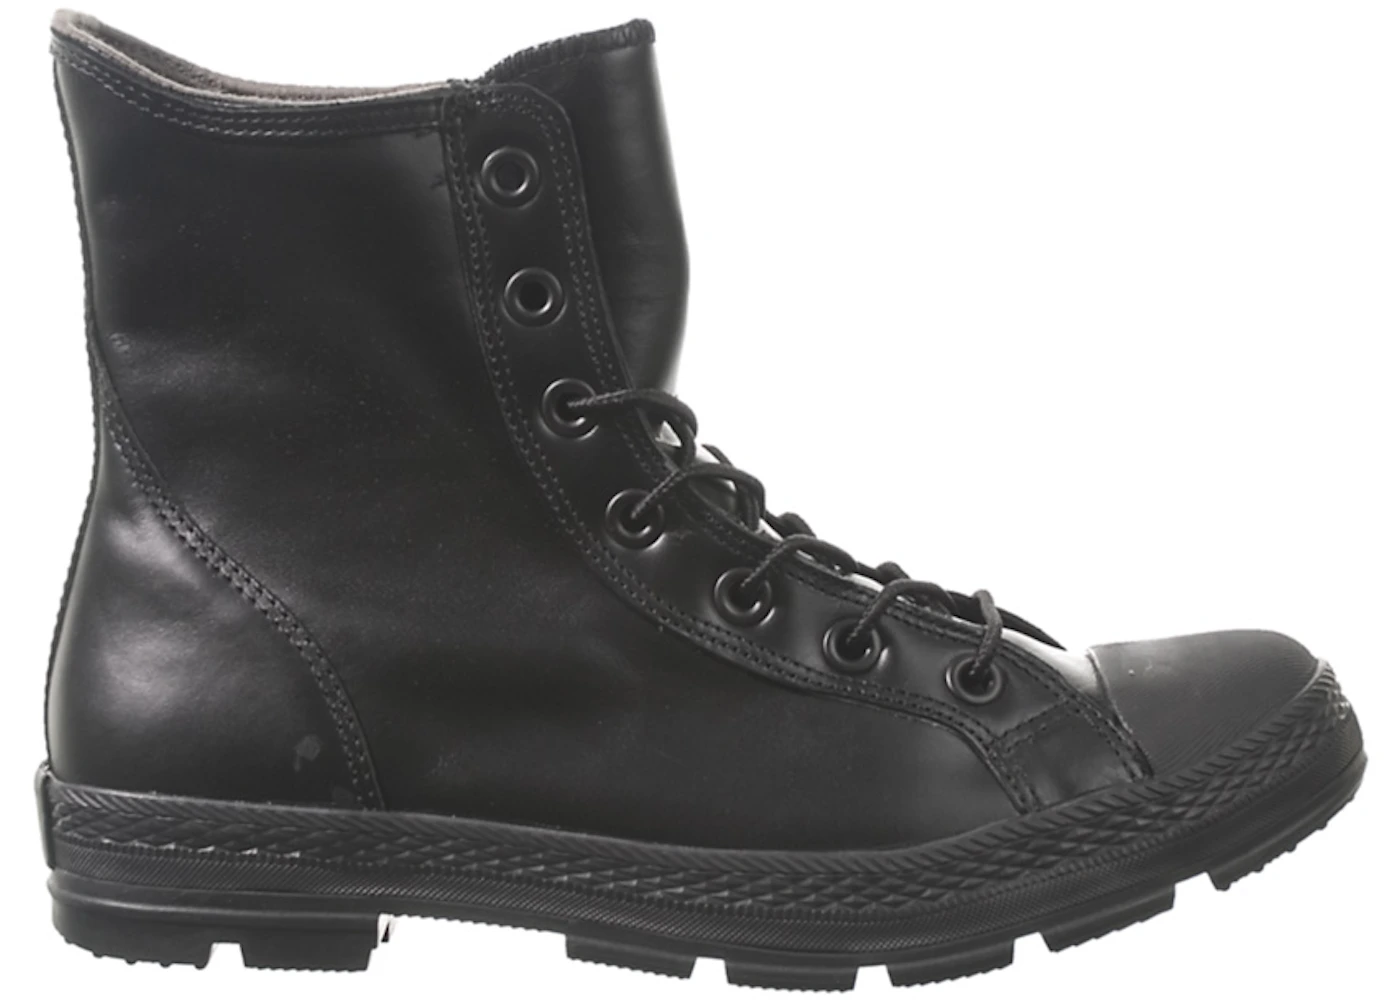 Converse Chuck Taylor All-Star Outsider Boot Hi Black Leather - 111152 - US